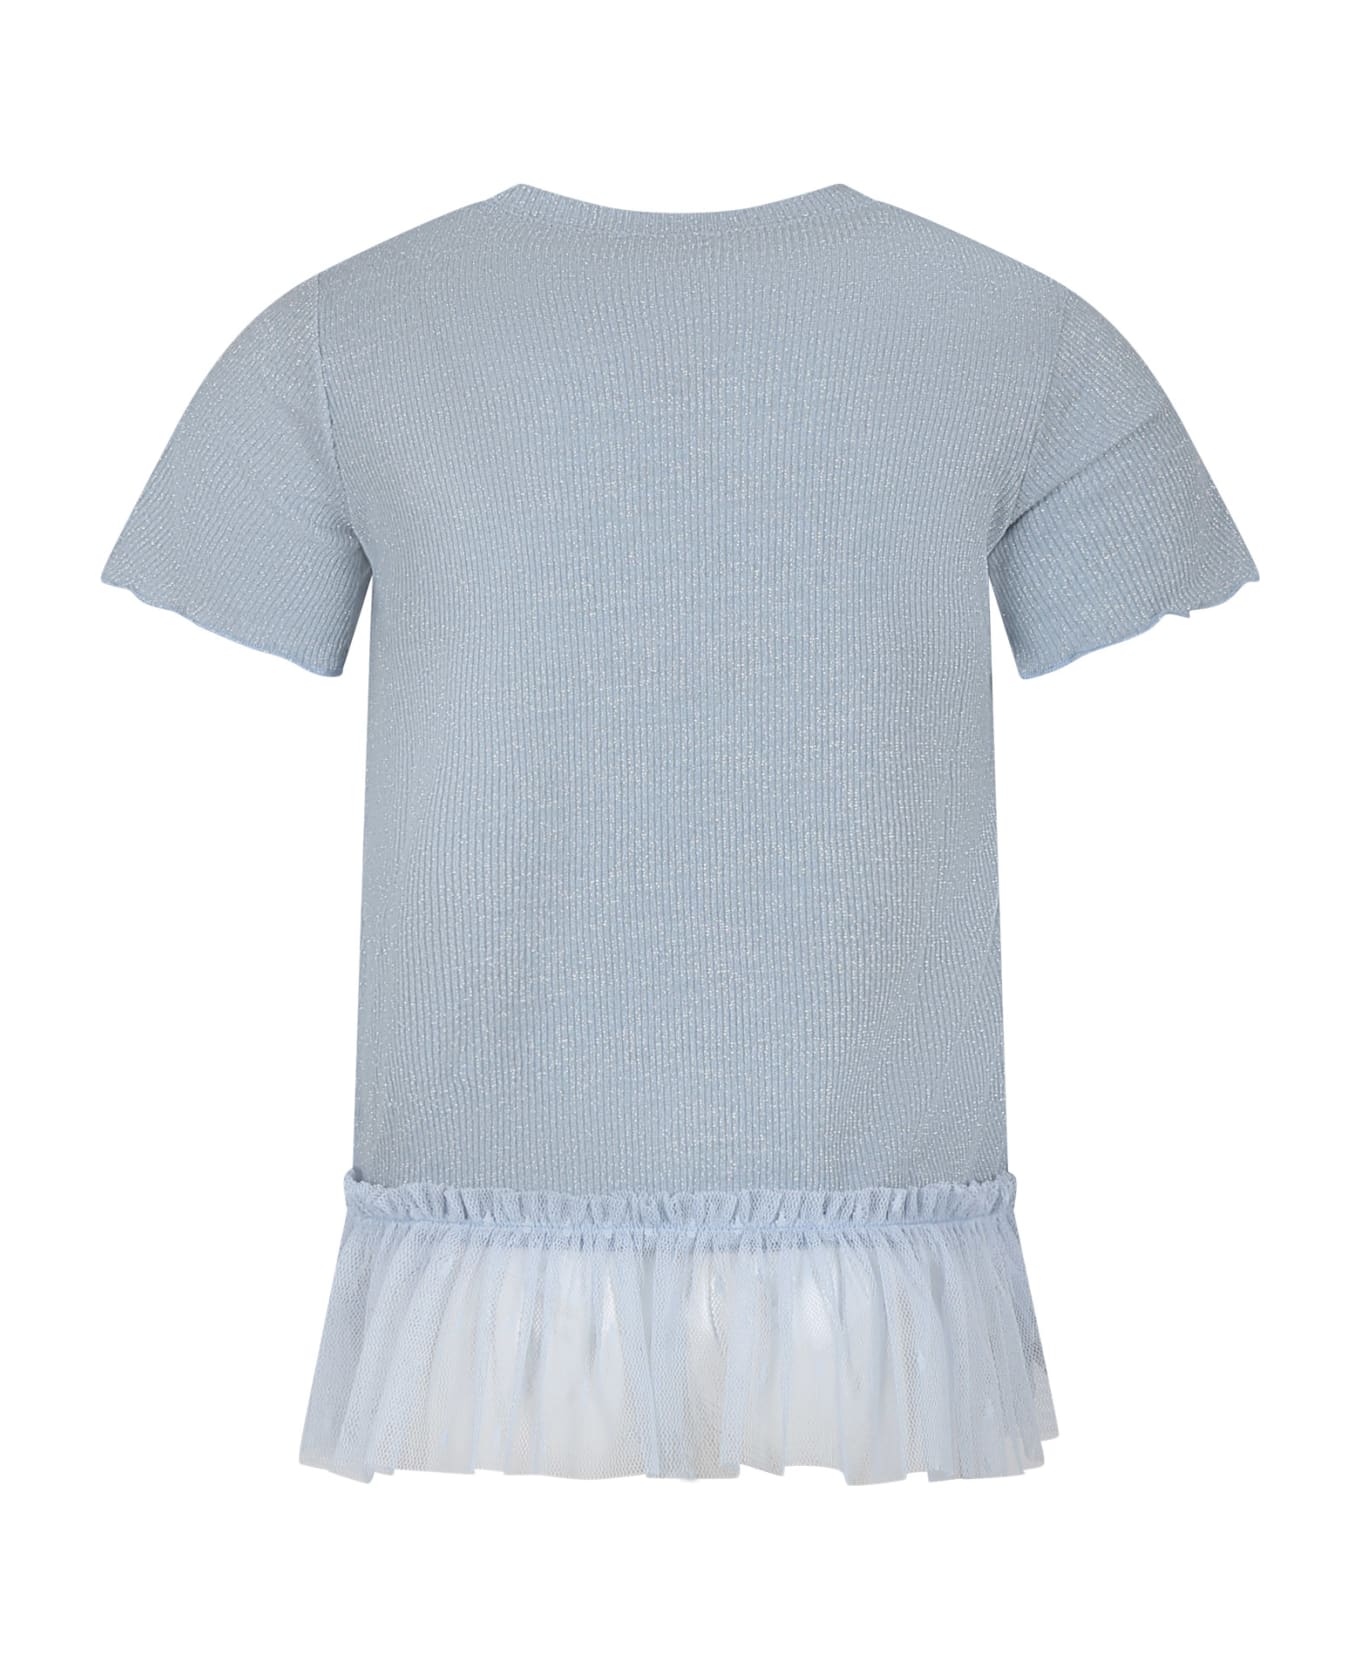 Caffe' d'Orzo Light Blue T-shirt Suit For Girl With Tulle - Light Blue